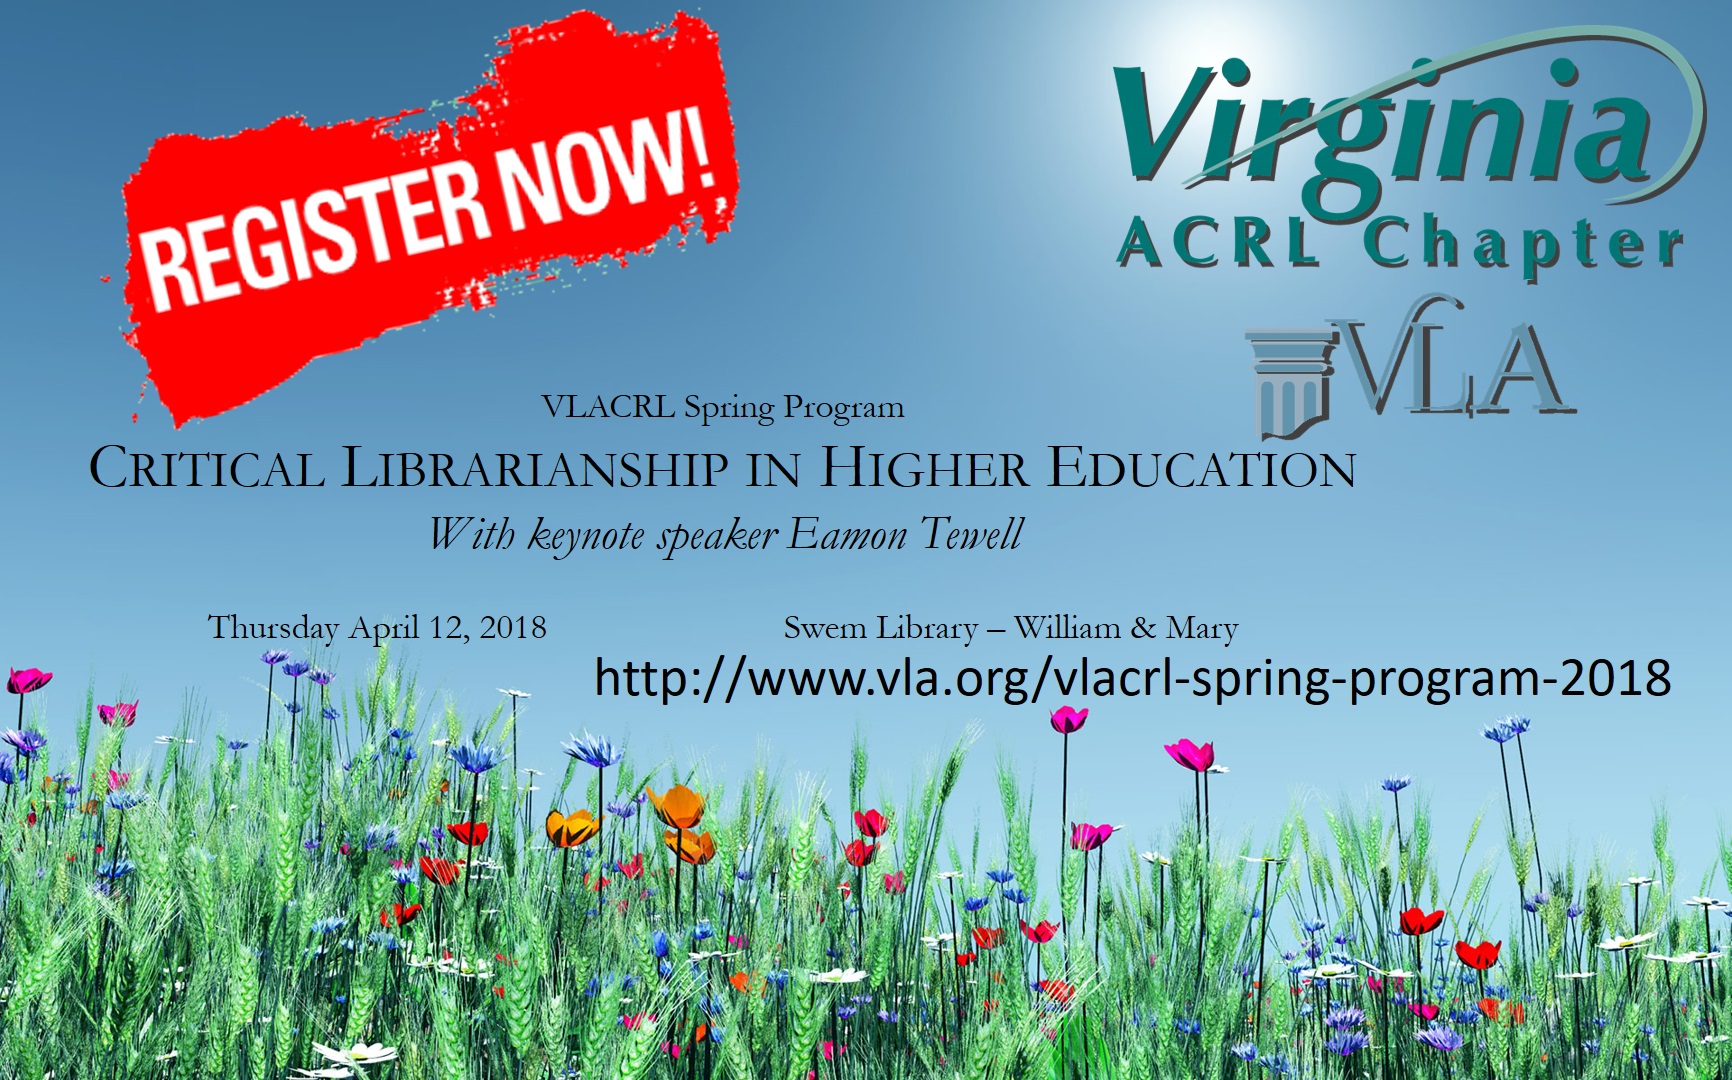 postcard with flowers, Register NOW for VLACRL Spring Program, Critical Librarianship in Higher Education, April 12, 2018 at Swem Library William and Mary, Registration open